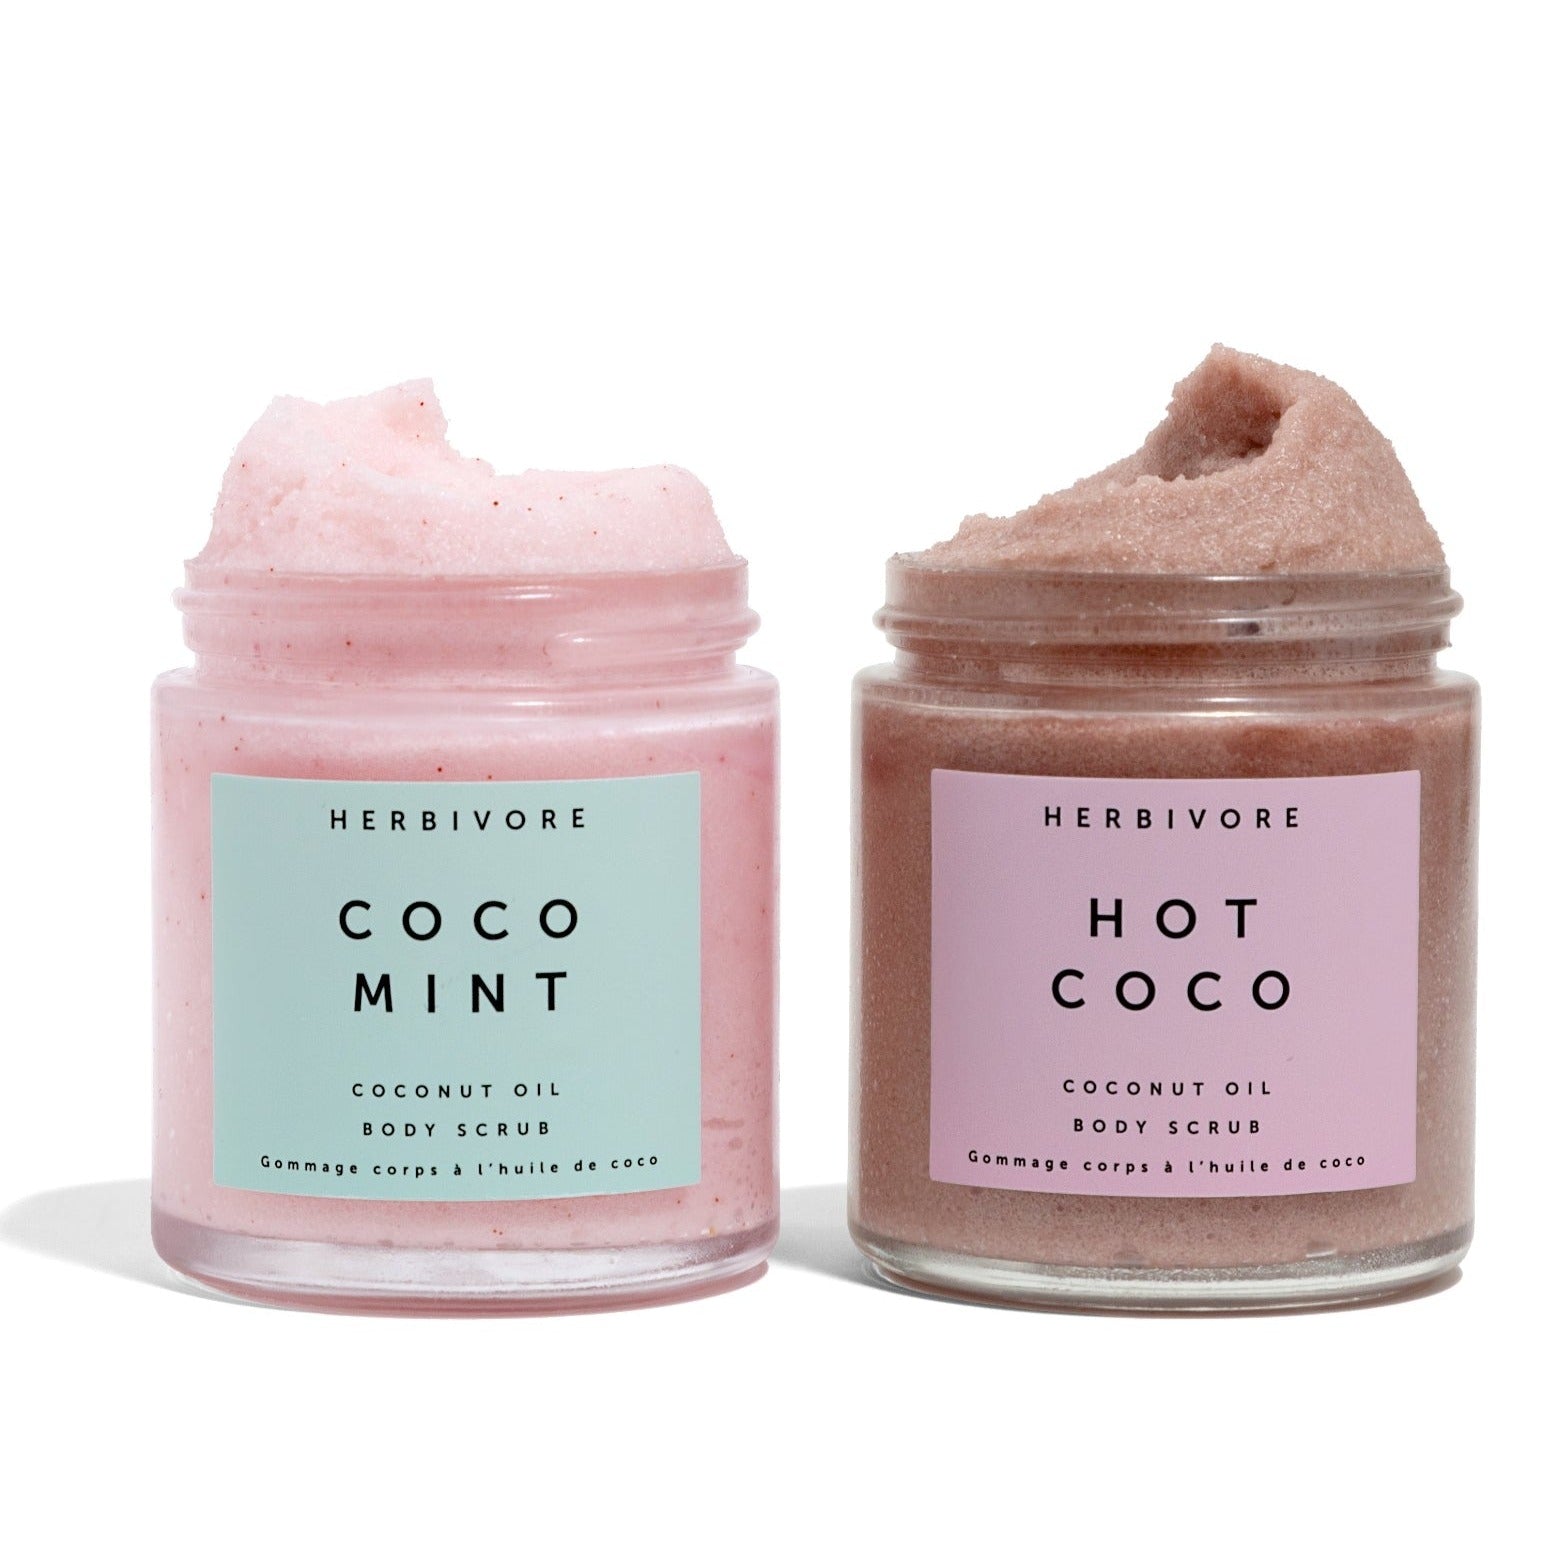 Both limited edition scents of the body scrub